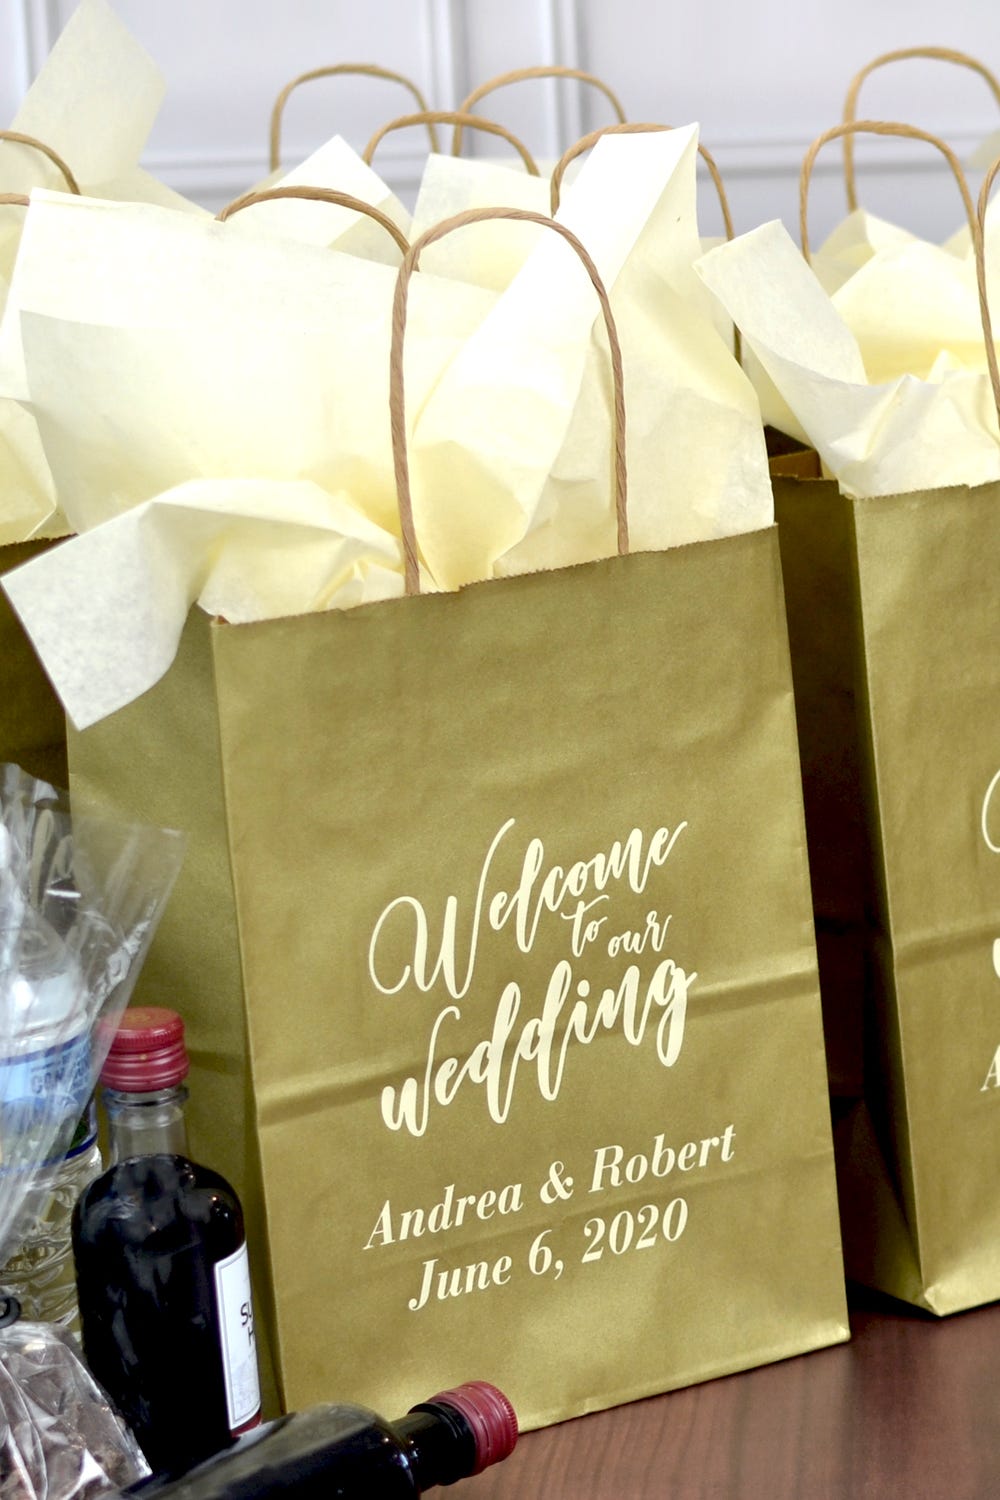 53 Phrases for Your Wedding Welcome Bags, by My Wedding Reception Ideas